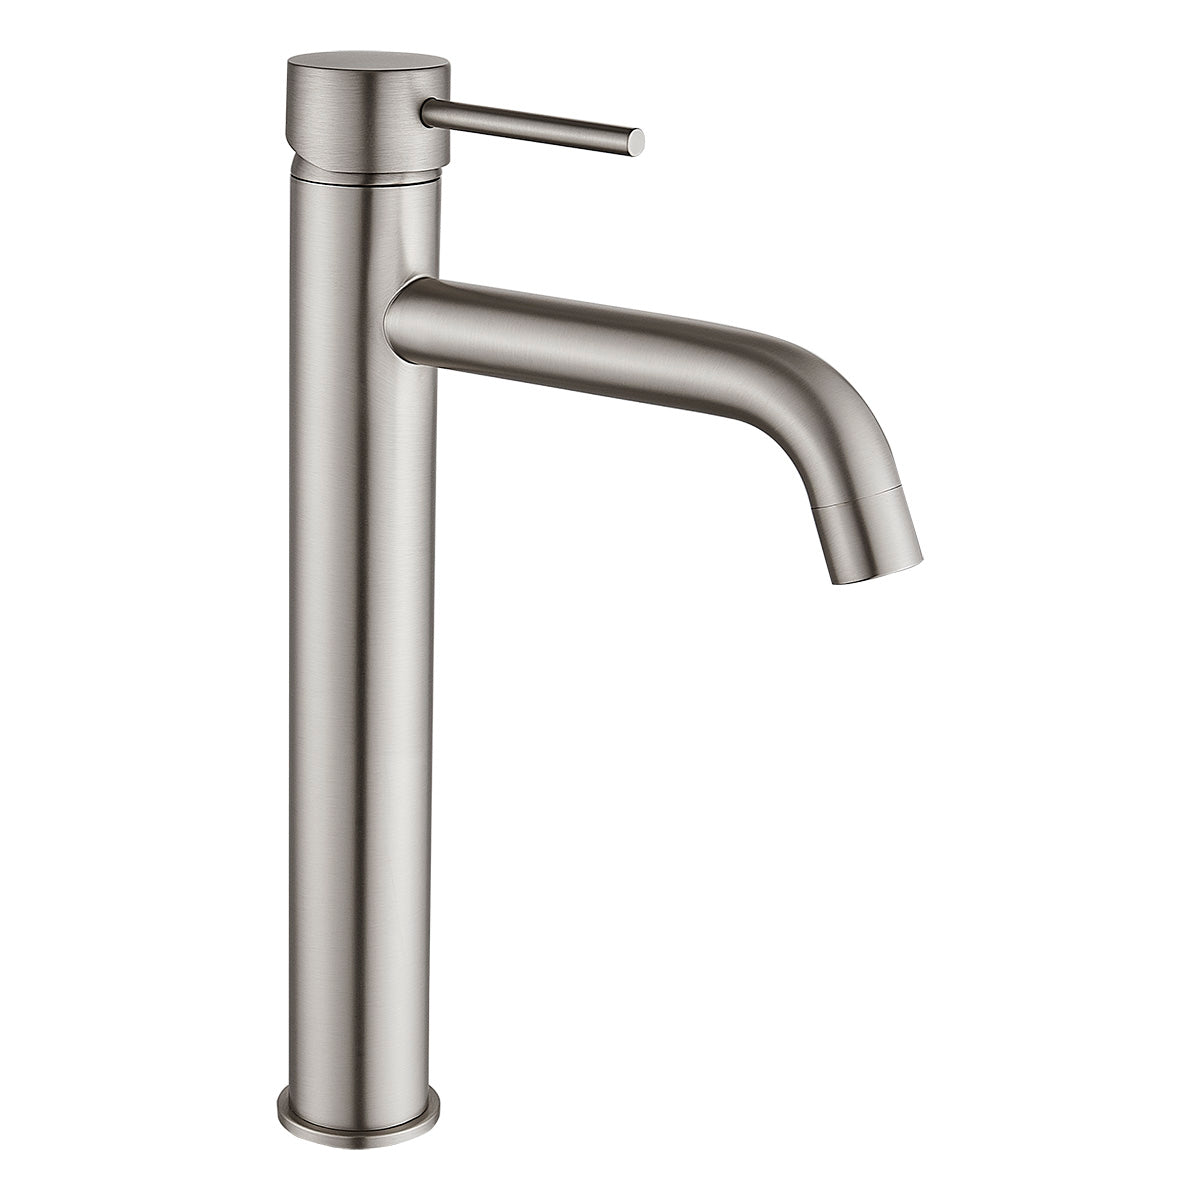 HELLYCAR IDEAL HIGH BASIN MIXER 315MM BRUSHED NICKEL